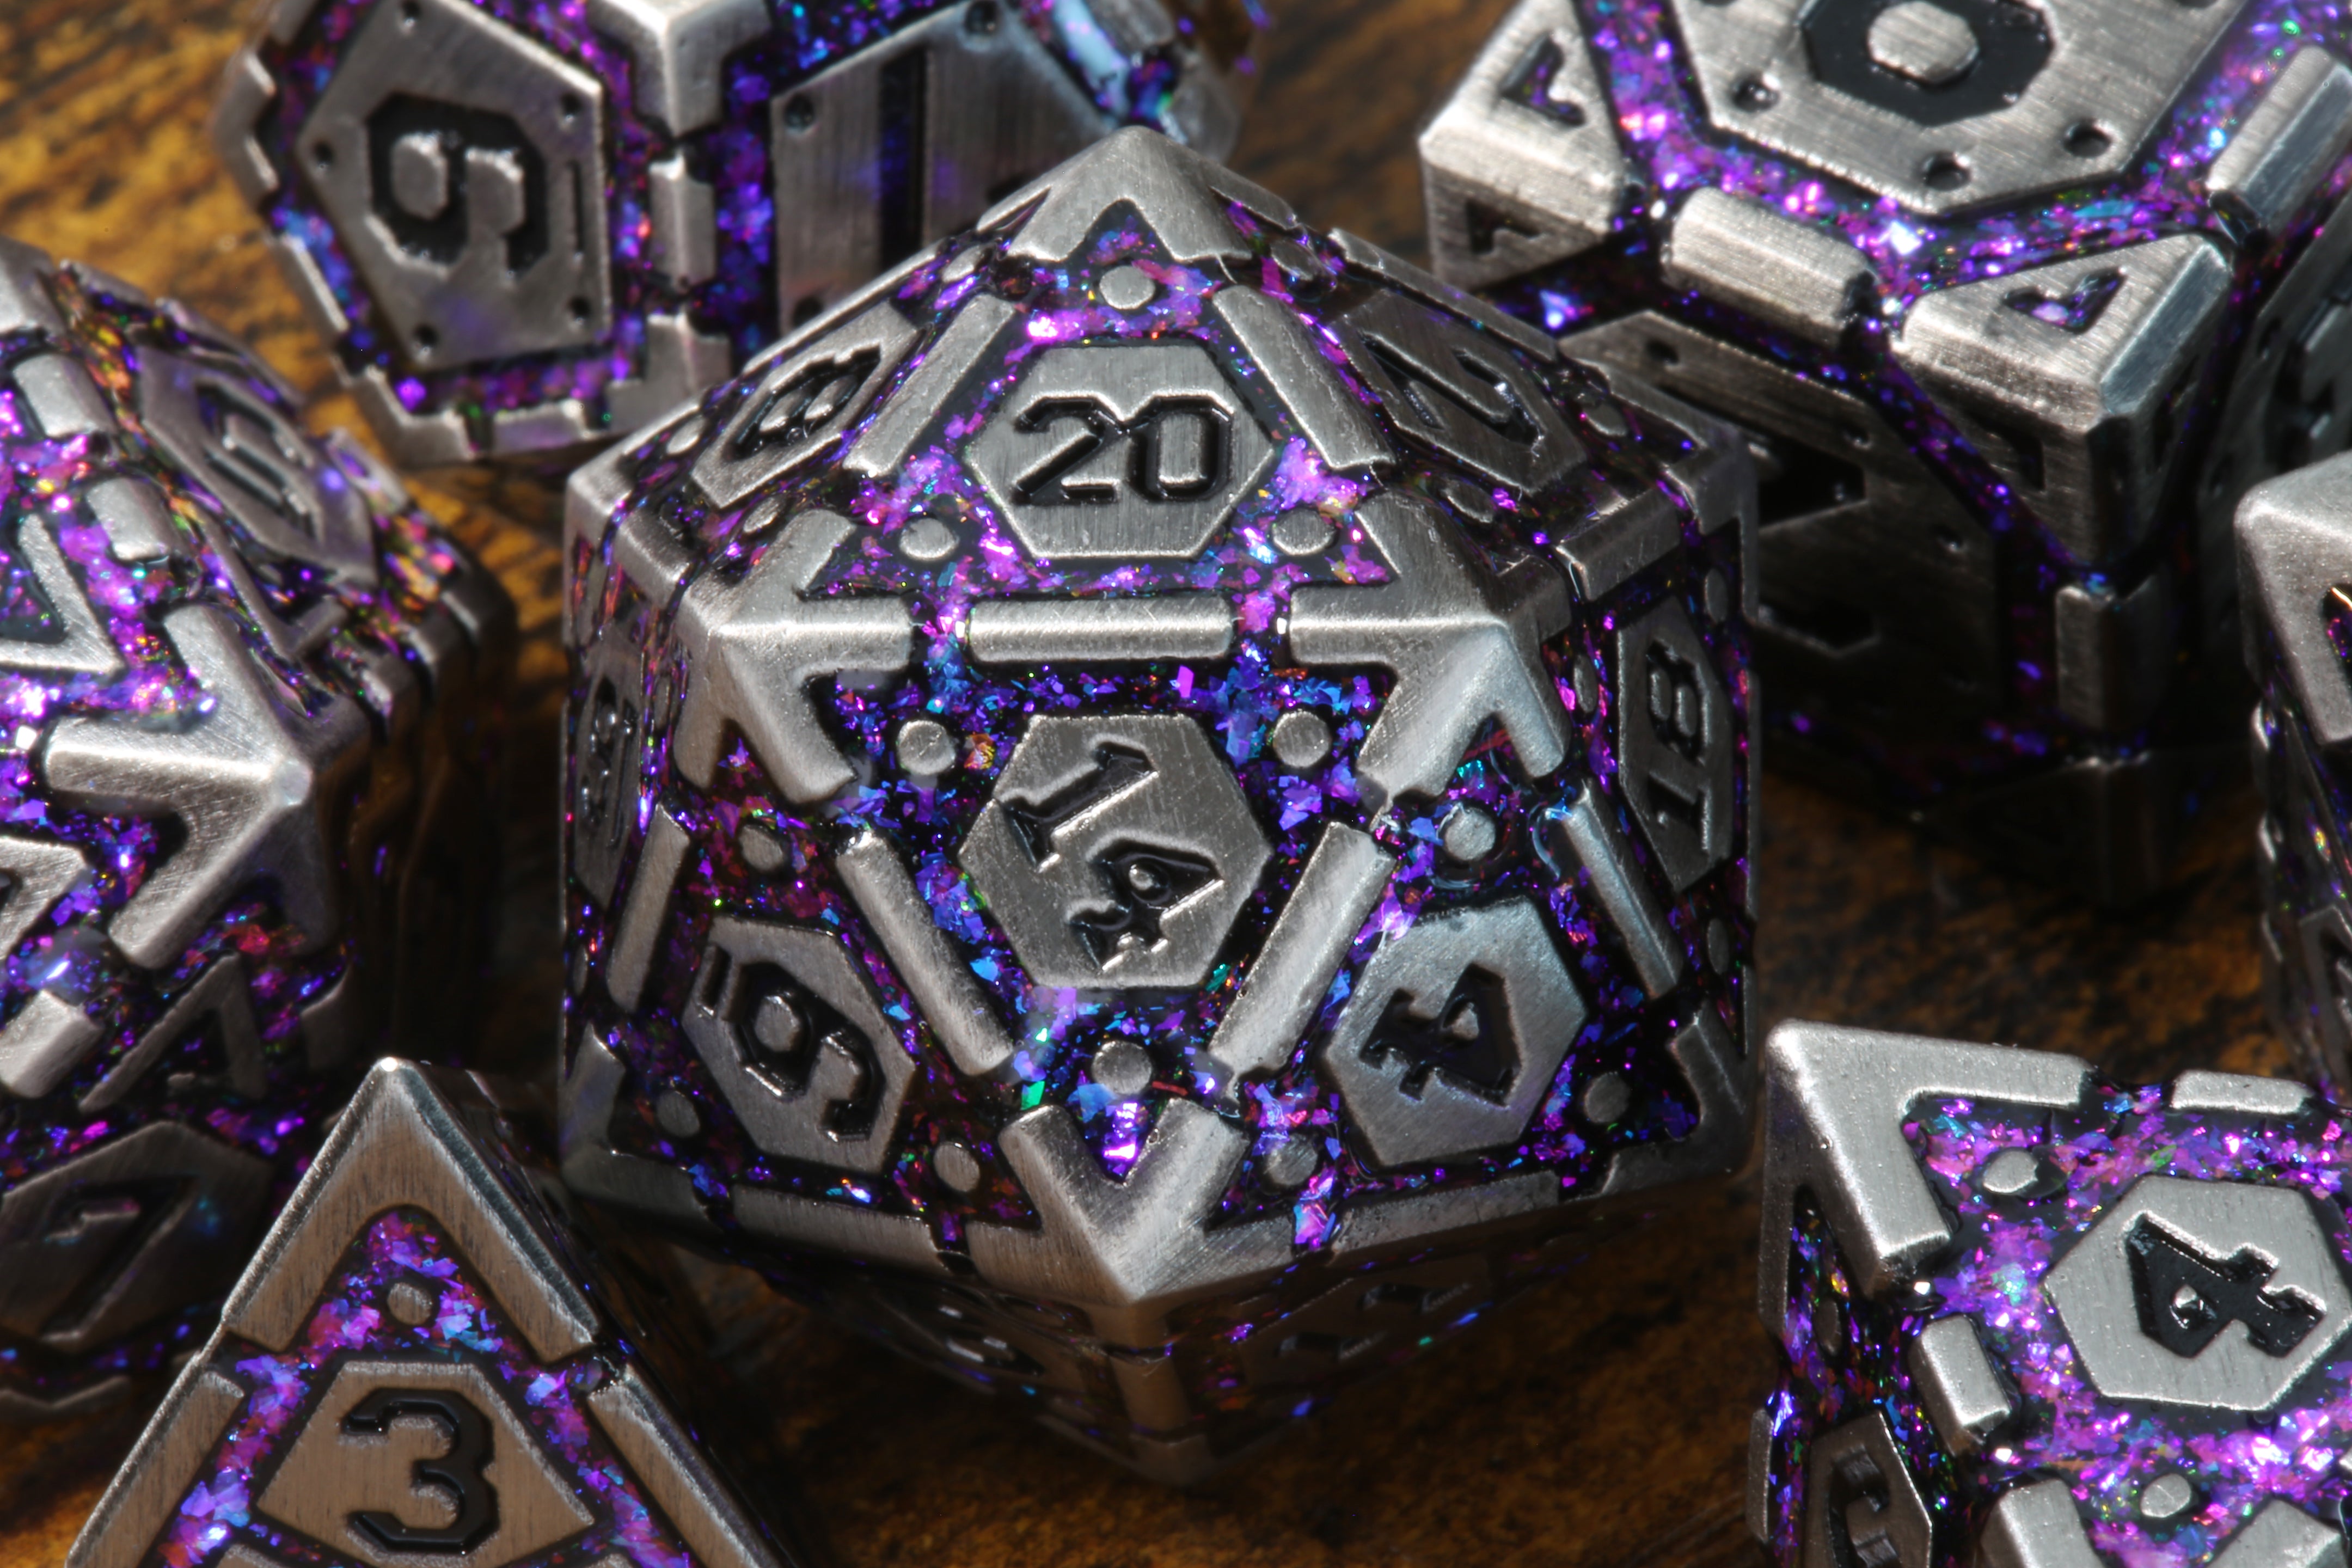 Stellar Relic dice set with purple and antique silver metal - The Wizard's Vault